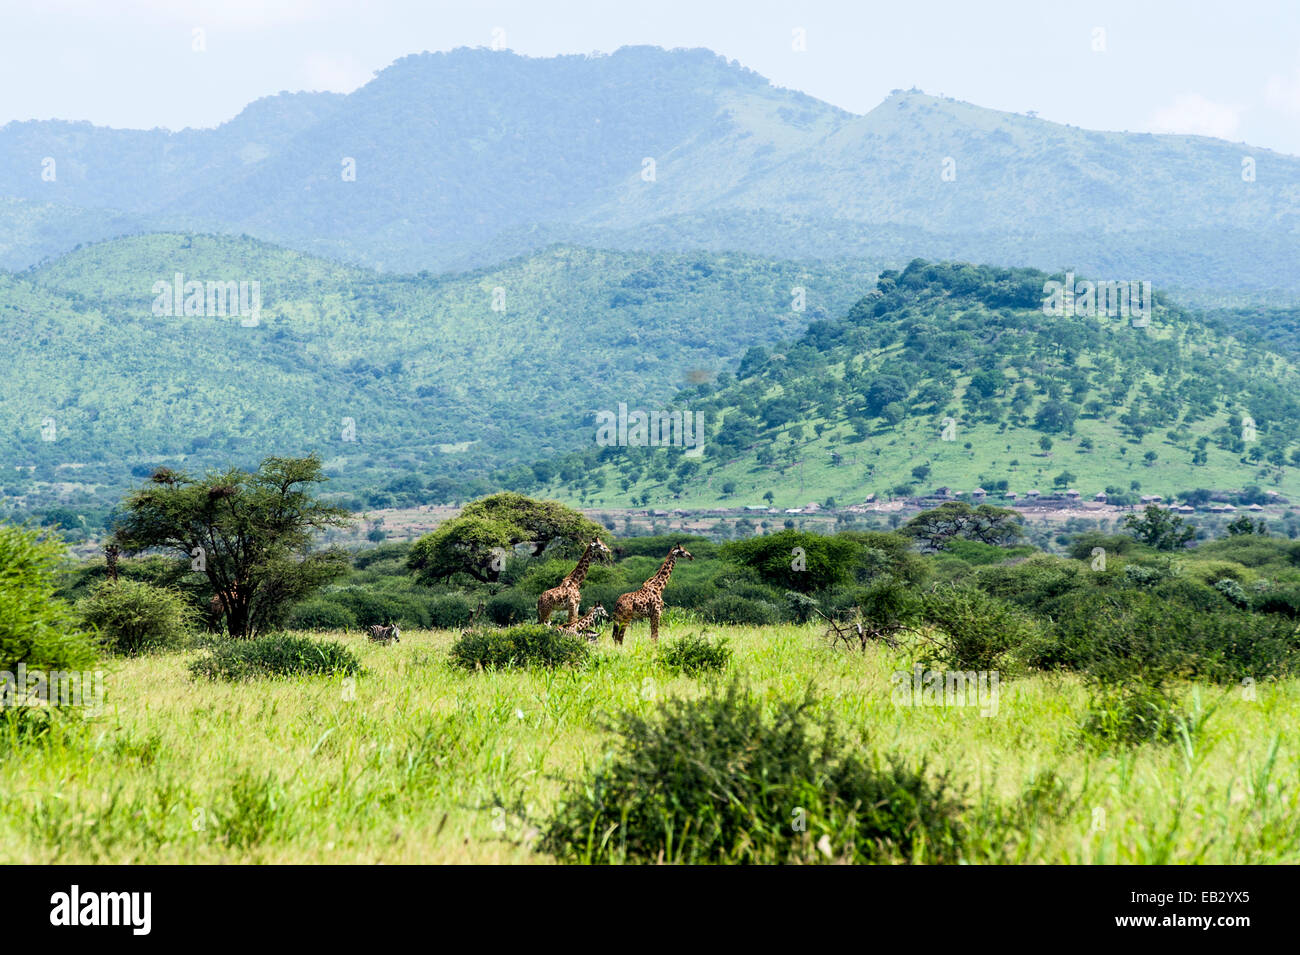 A Giraffe family browsing among open woodland at the foot of rugged hills. Stock Photo